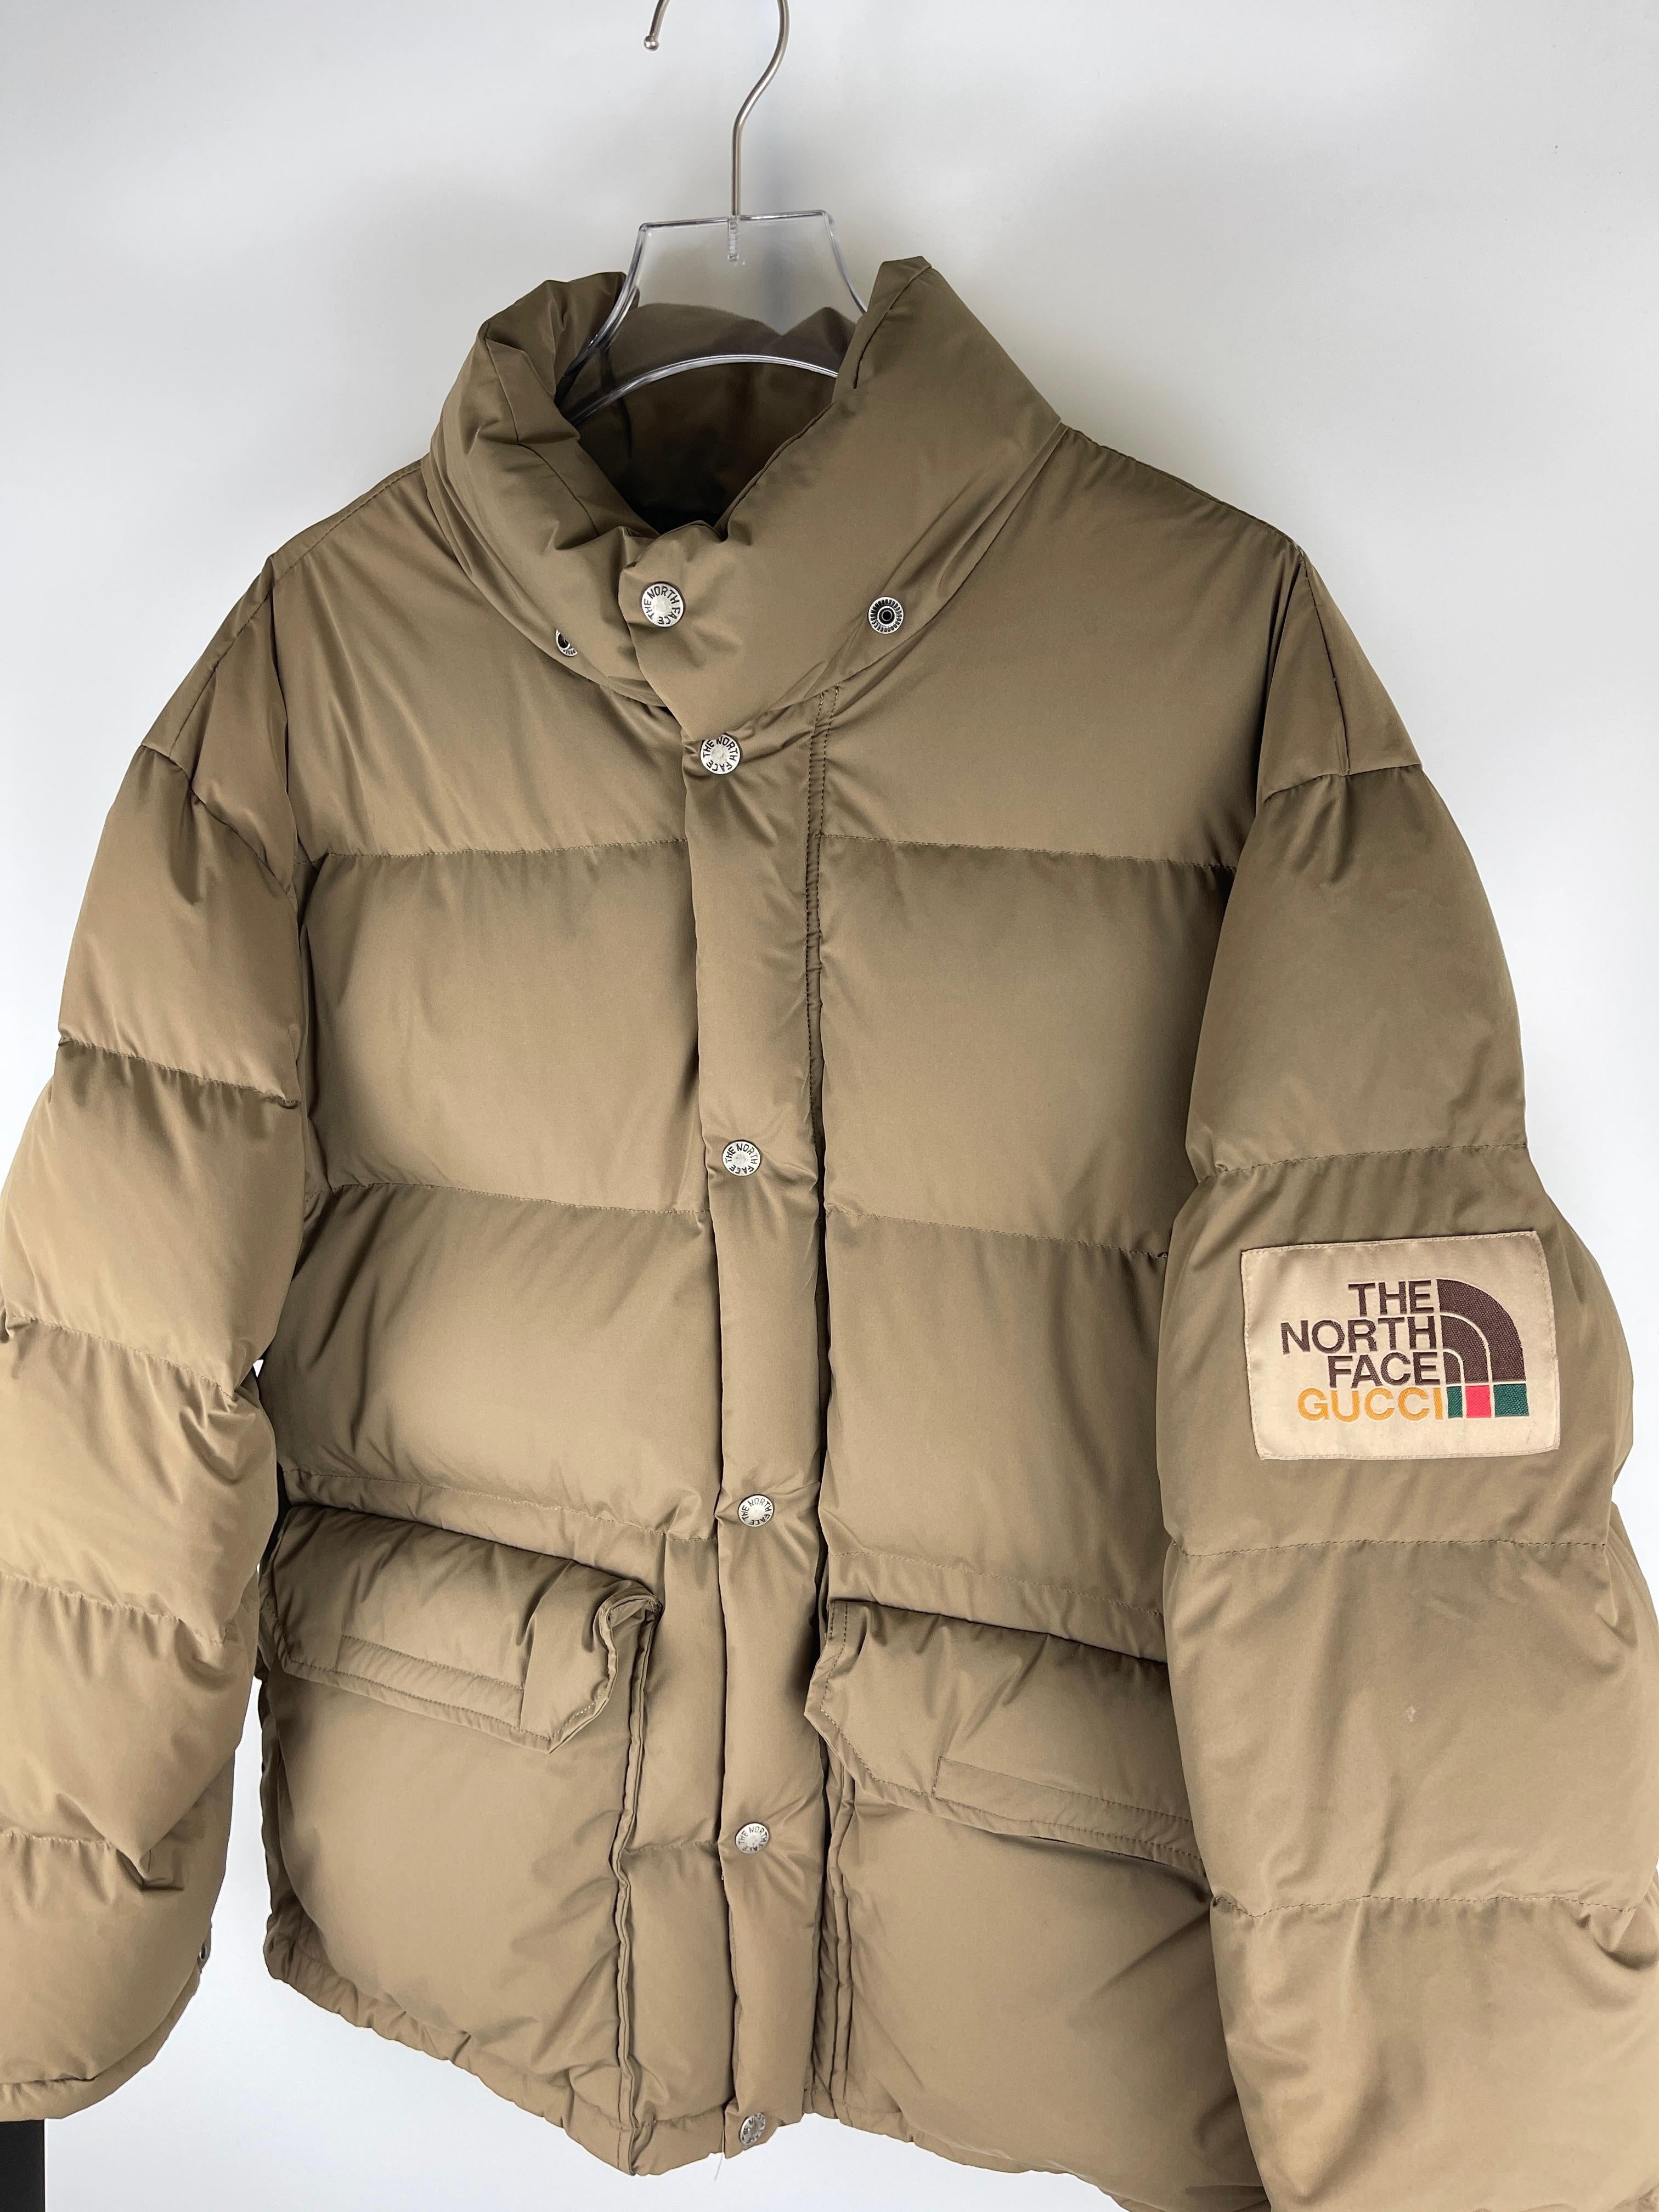 From the collaborate capsule of Gucci and The North Face.

Size: XXL, very oversized and could fits everybody.

Condition: The item is in damaged condition, with no attached hood and there's a flaw at the back of the item.

Please message us with